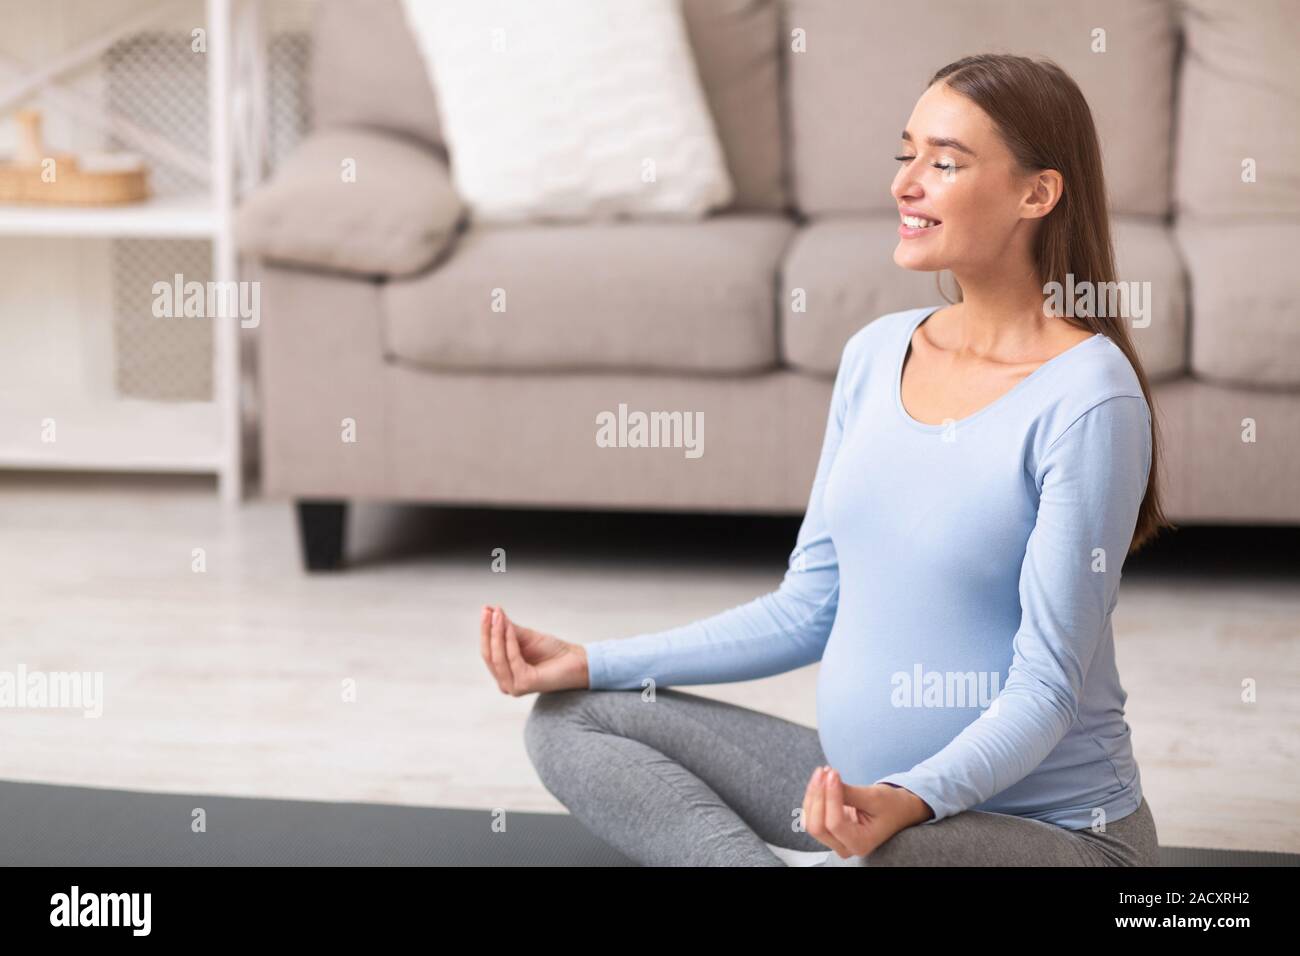 Pregnant woman doing yoga sitting on the floor at home Stock Photo